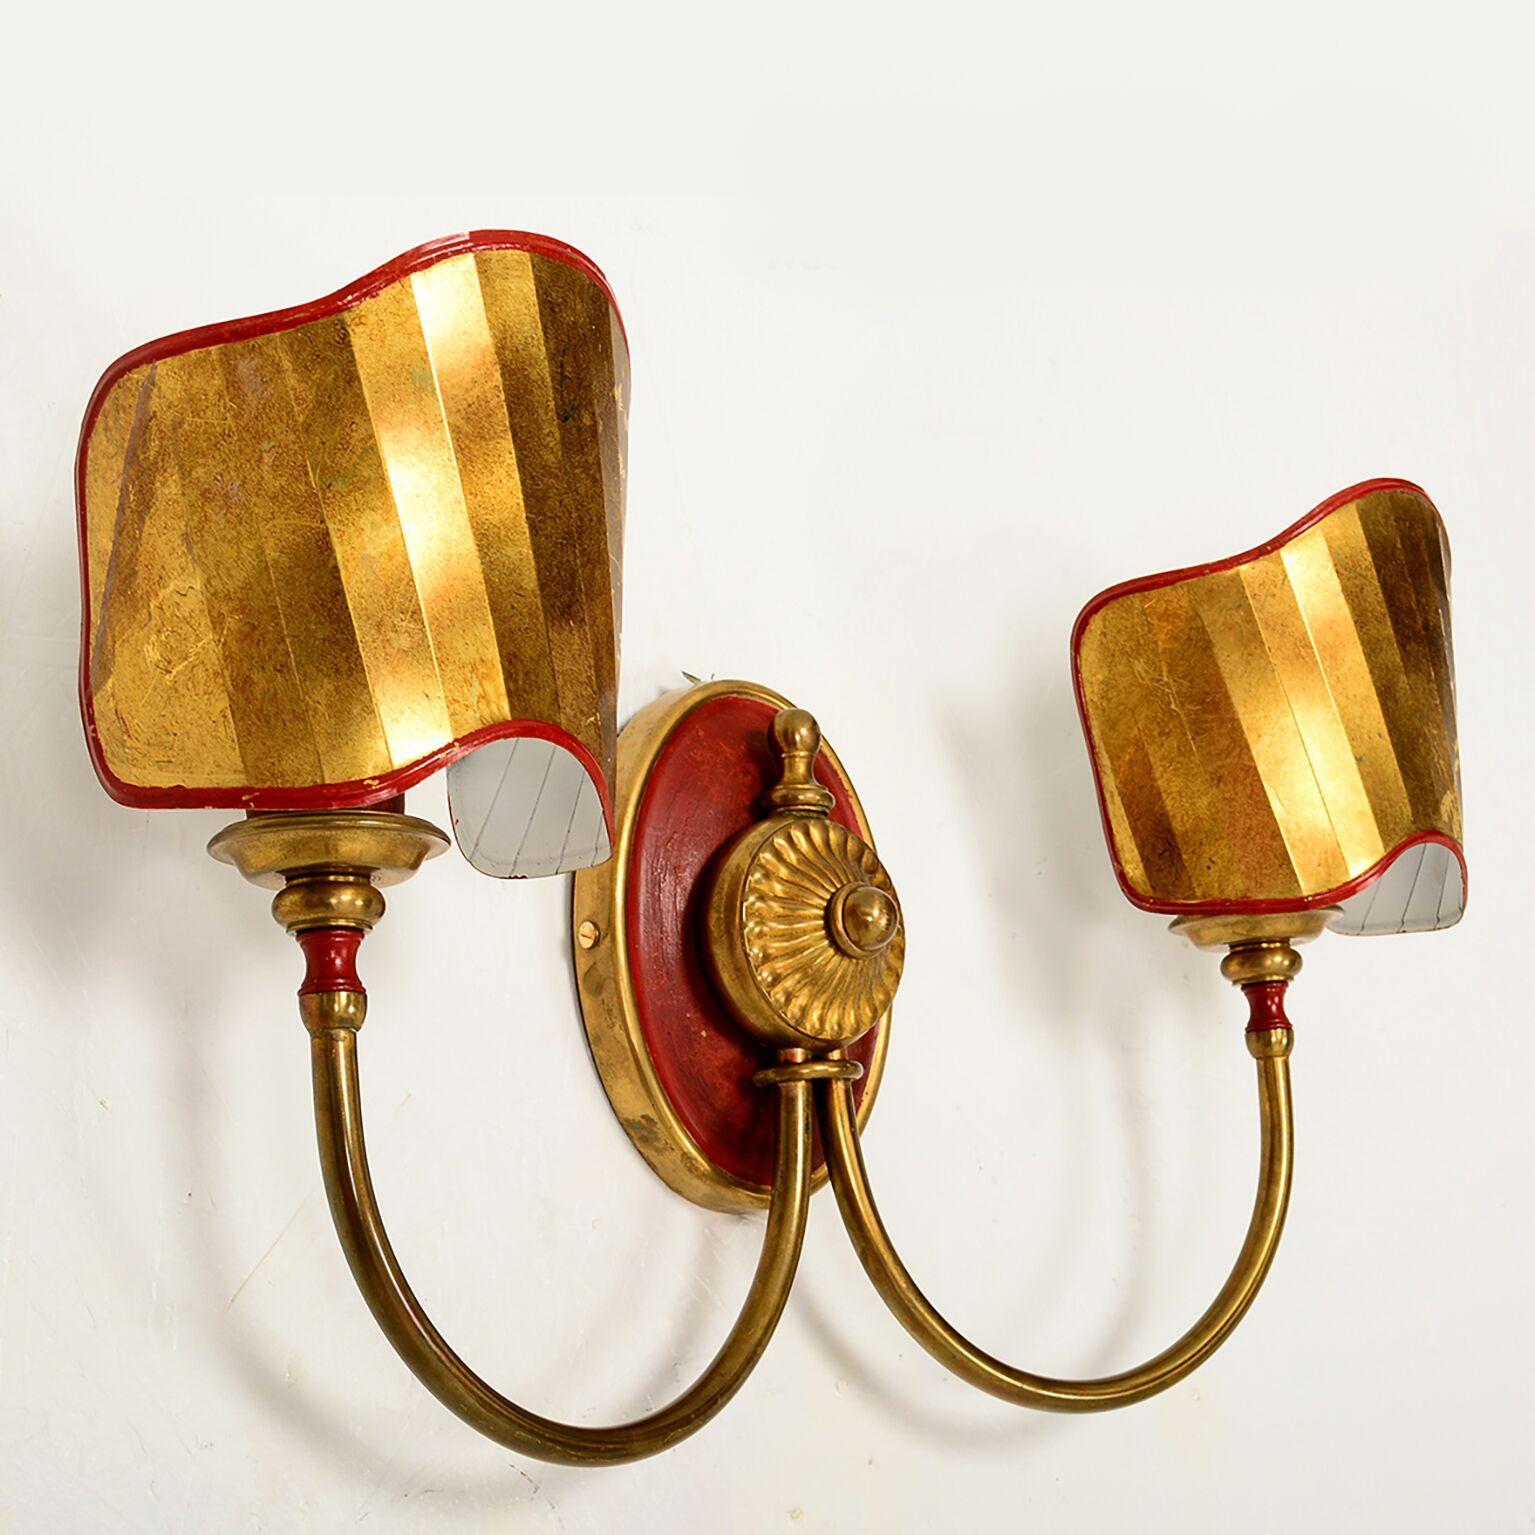 North American Gio Ponti Style Pair of Italian Wall Sconces with Brass Shield 1980s